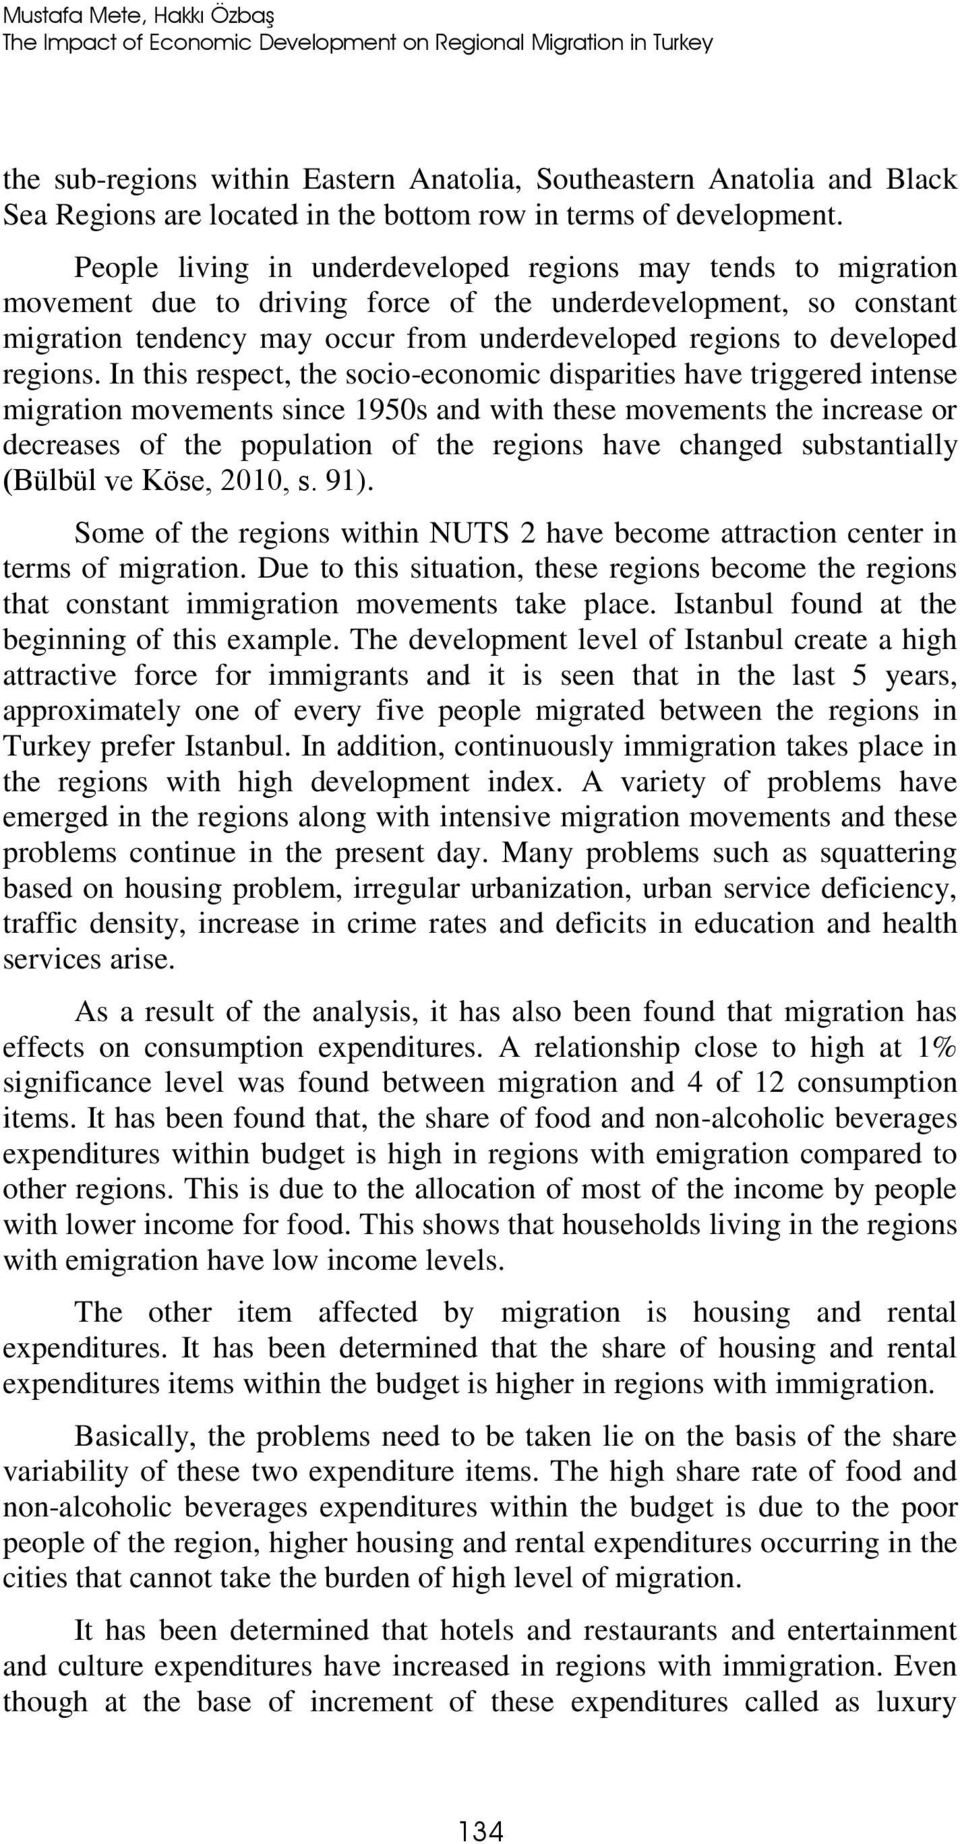 People living in underdeveloped regions may tends to migration movement due to driving force of the underdevelopment, so constant migration tendency may occur from underdeveloped regions to developed